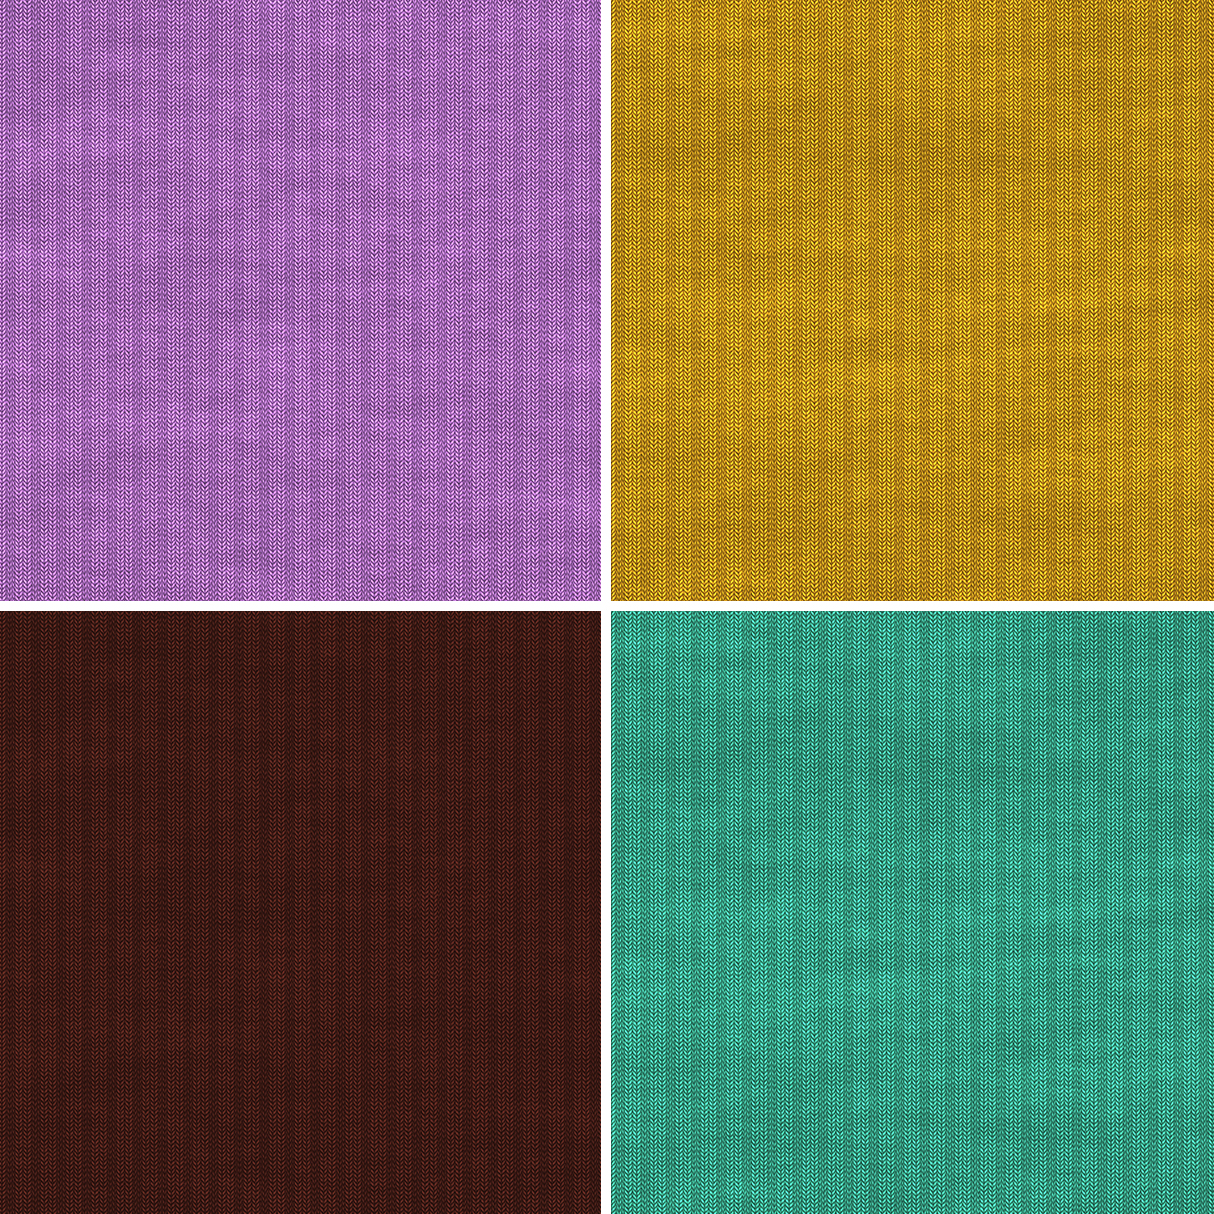 30 Knitted Background Textures Samples Preview – Part 2